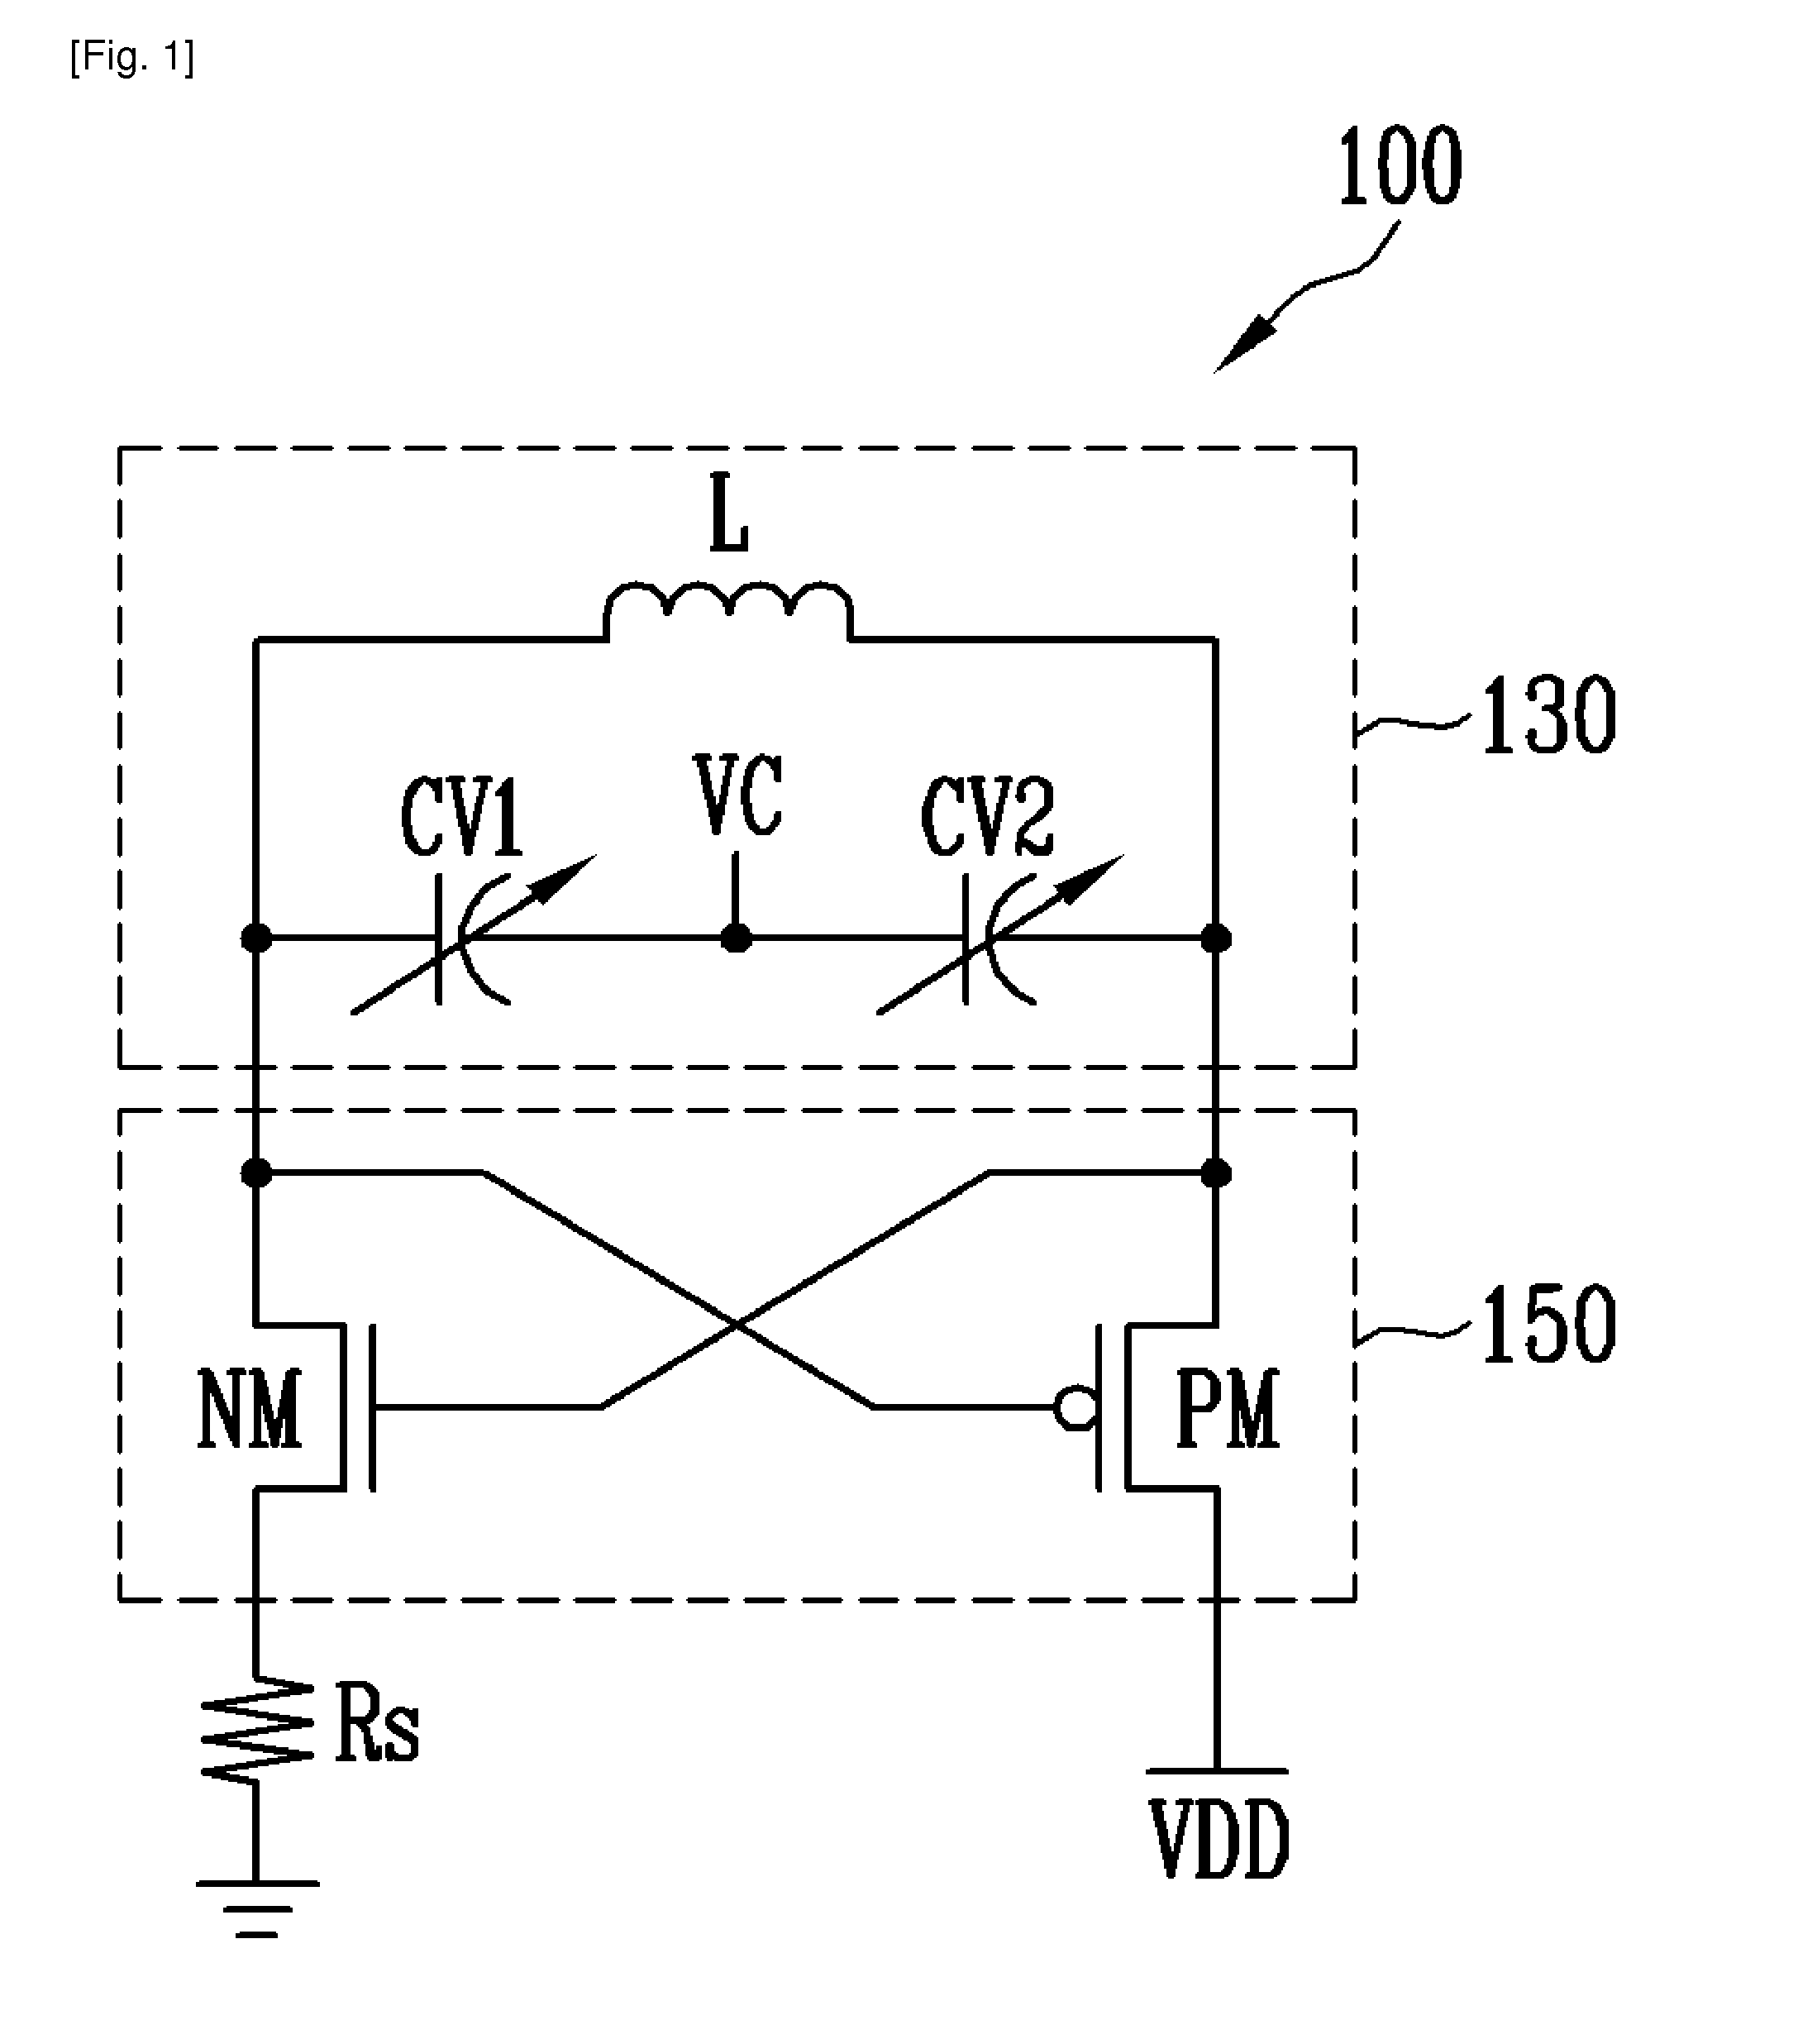 The differential vco and quadrature vco using center-tapped cross-coupling of transformer